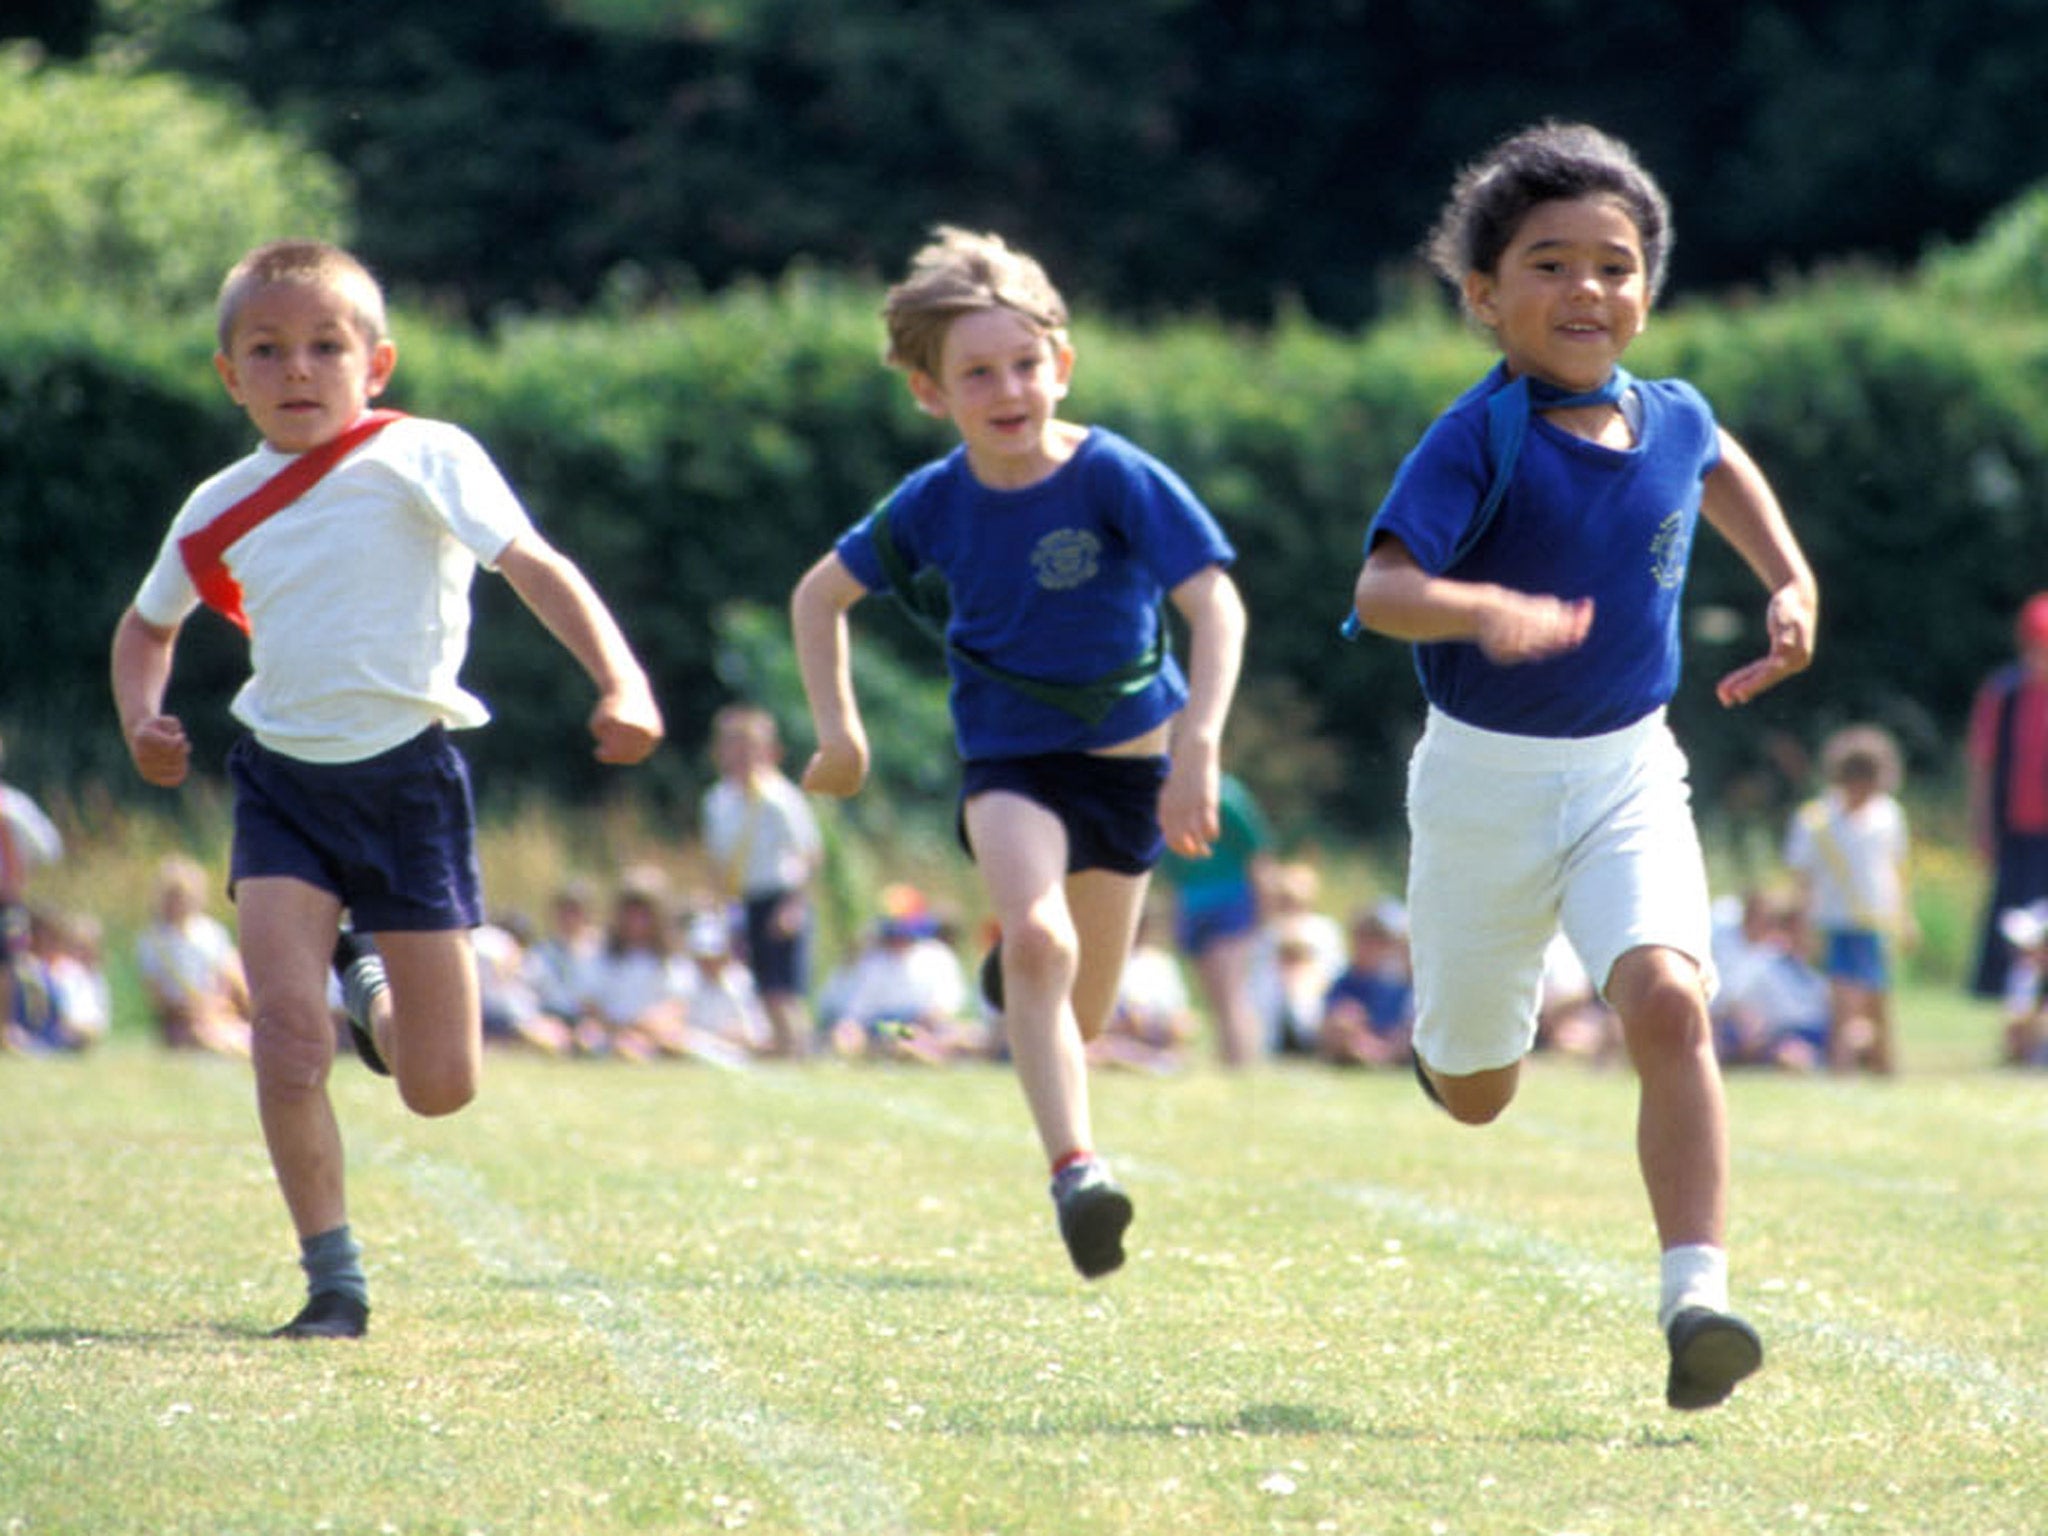 Children from poorer backgrounds less likely to take part in sport out of school